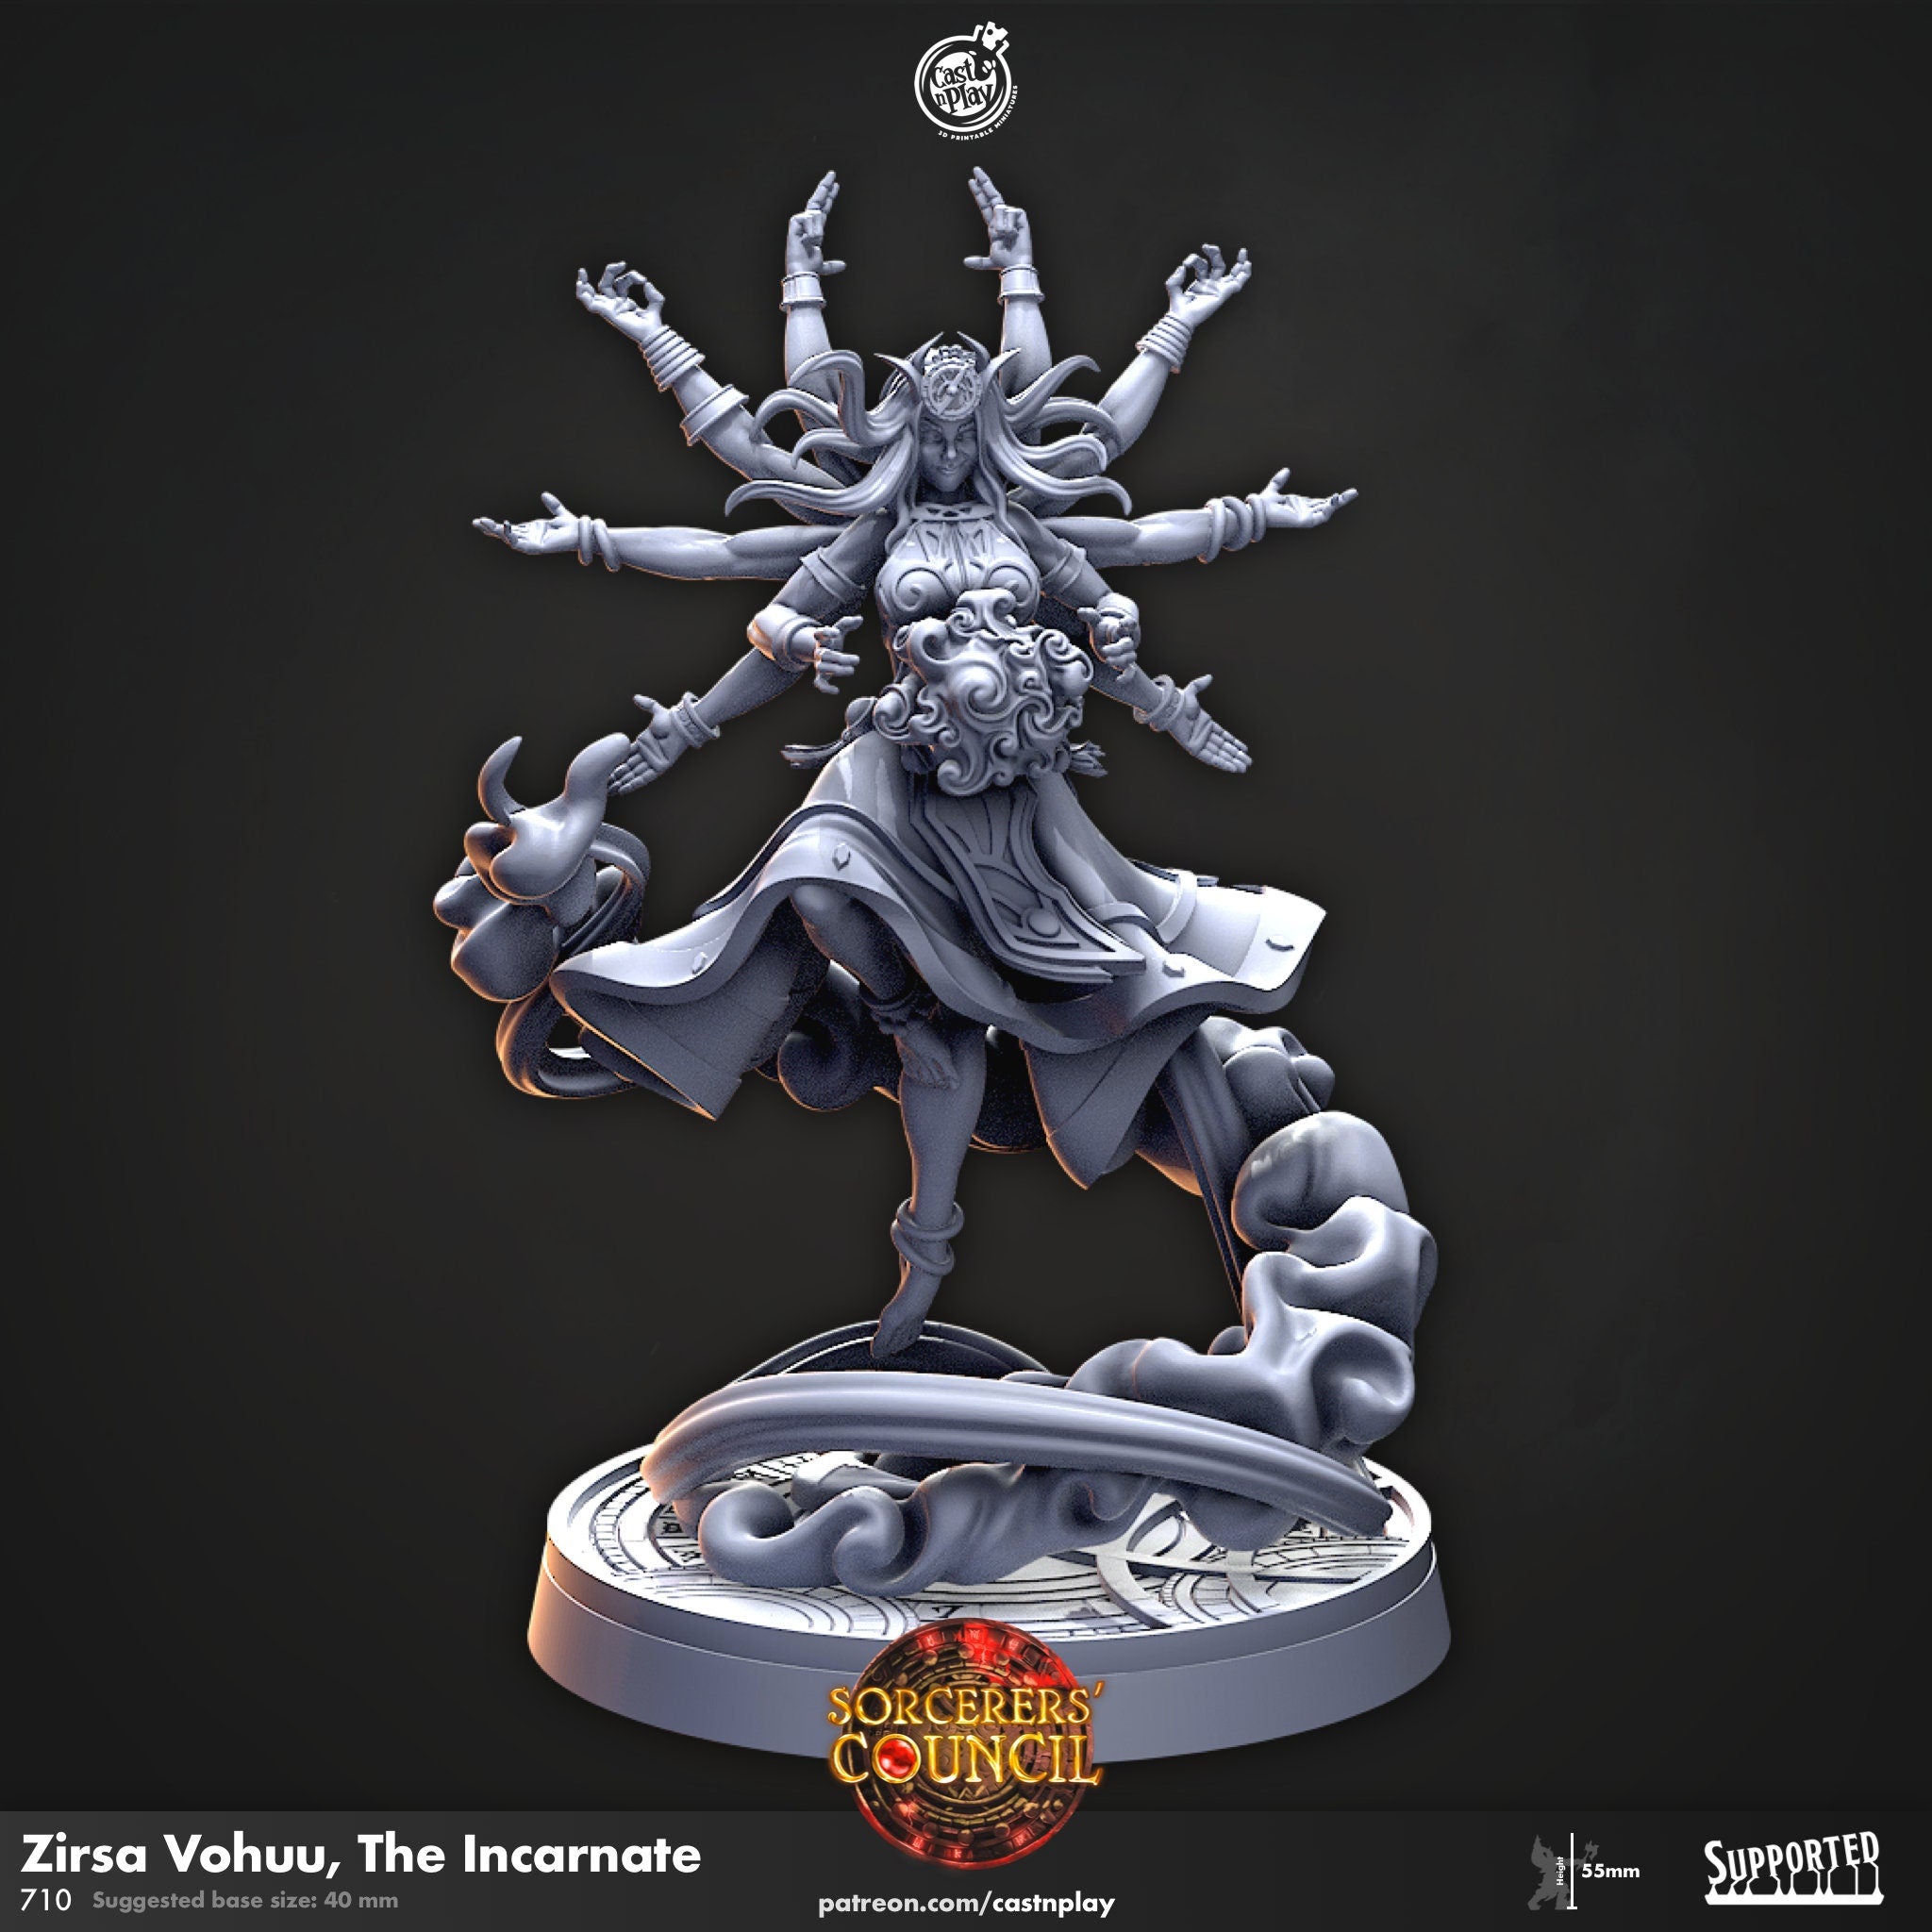 Zirsa Vohuu, The Incarnate by Cast N Play (Sorcerer's Council)